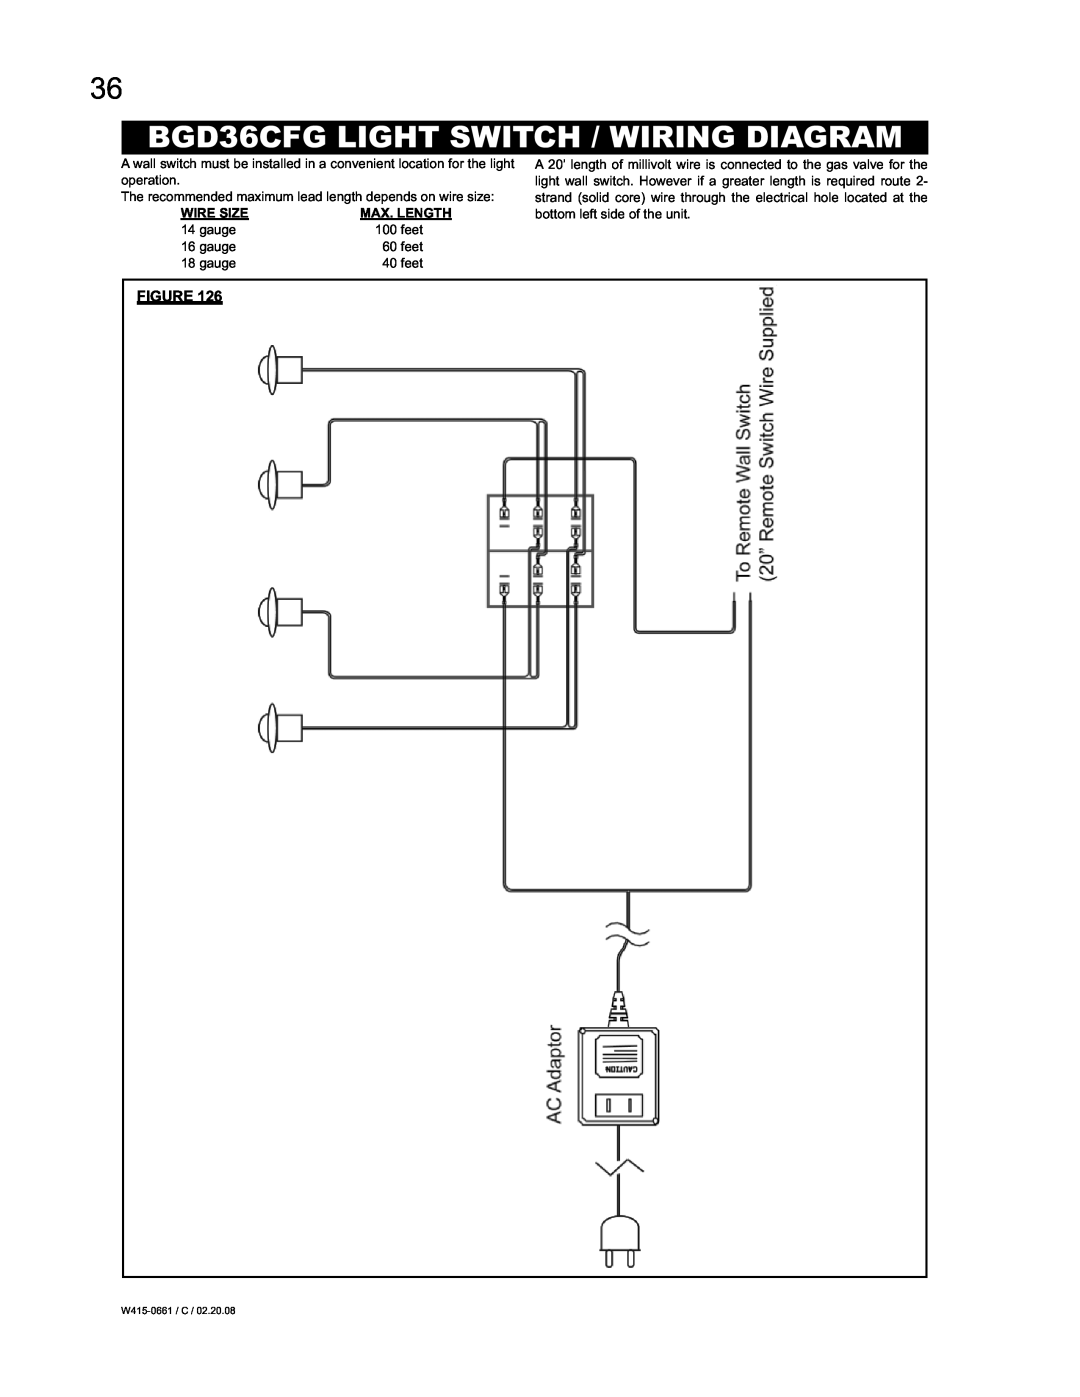 Napoleon Fireplaces BGD36CFGN, BGD42CFN, BGD36CFNTR manual BGD36CFG LIGHT SWITCH / WIRING DIAGRAM, Wire Size, Max. Length 